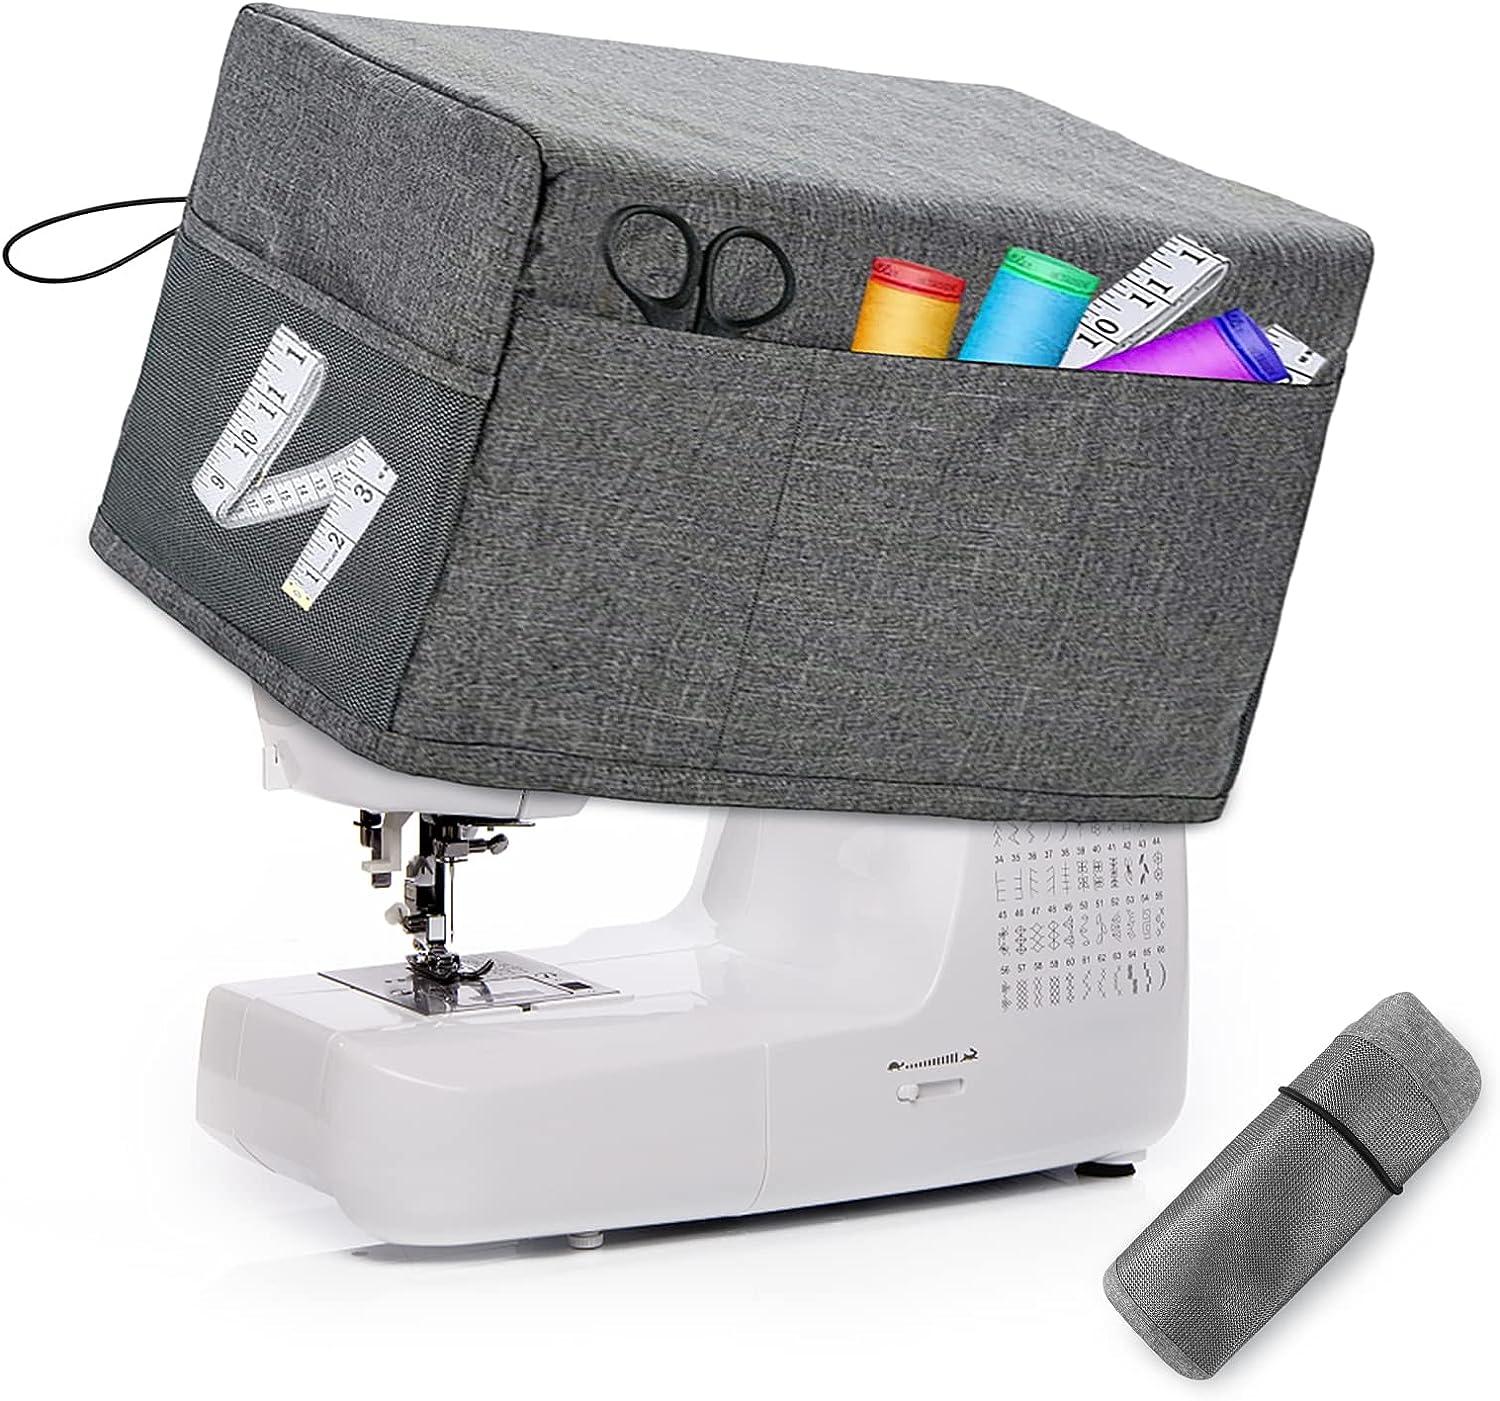 Petyoung Sewing Machine Dust Cover with Storage Pockets Foldable